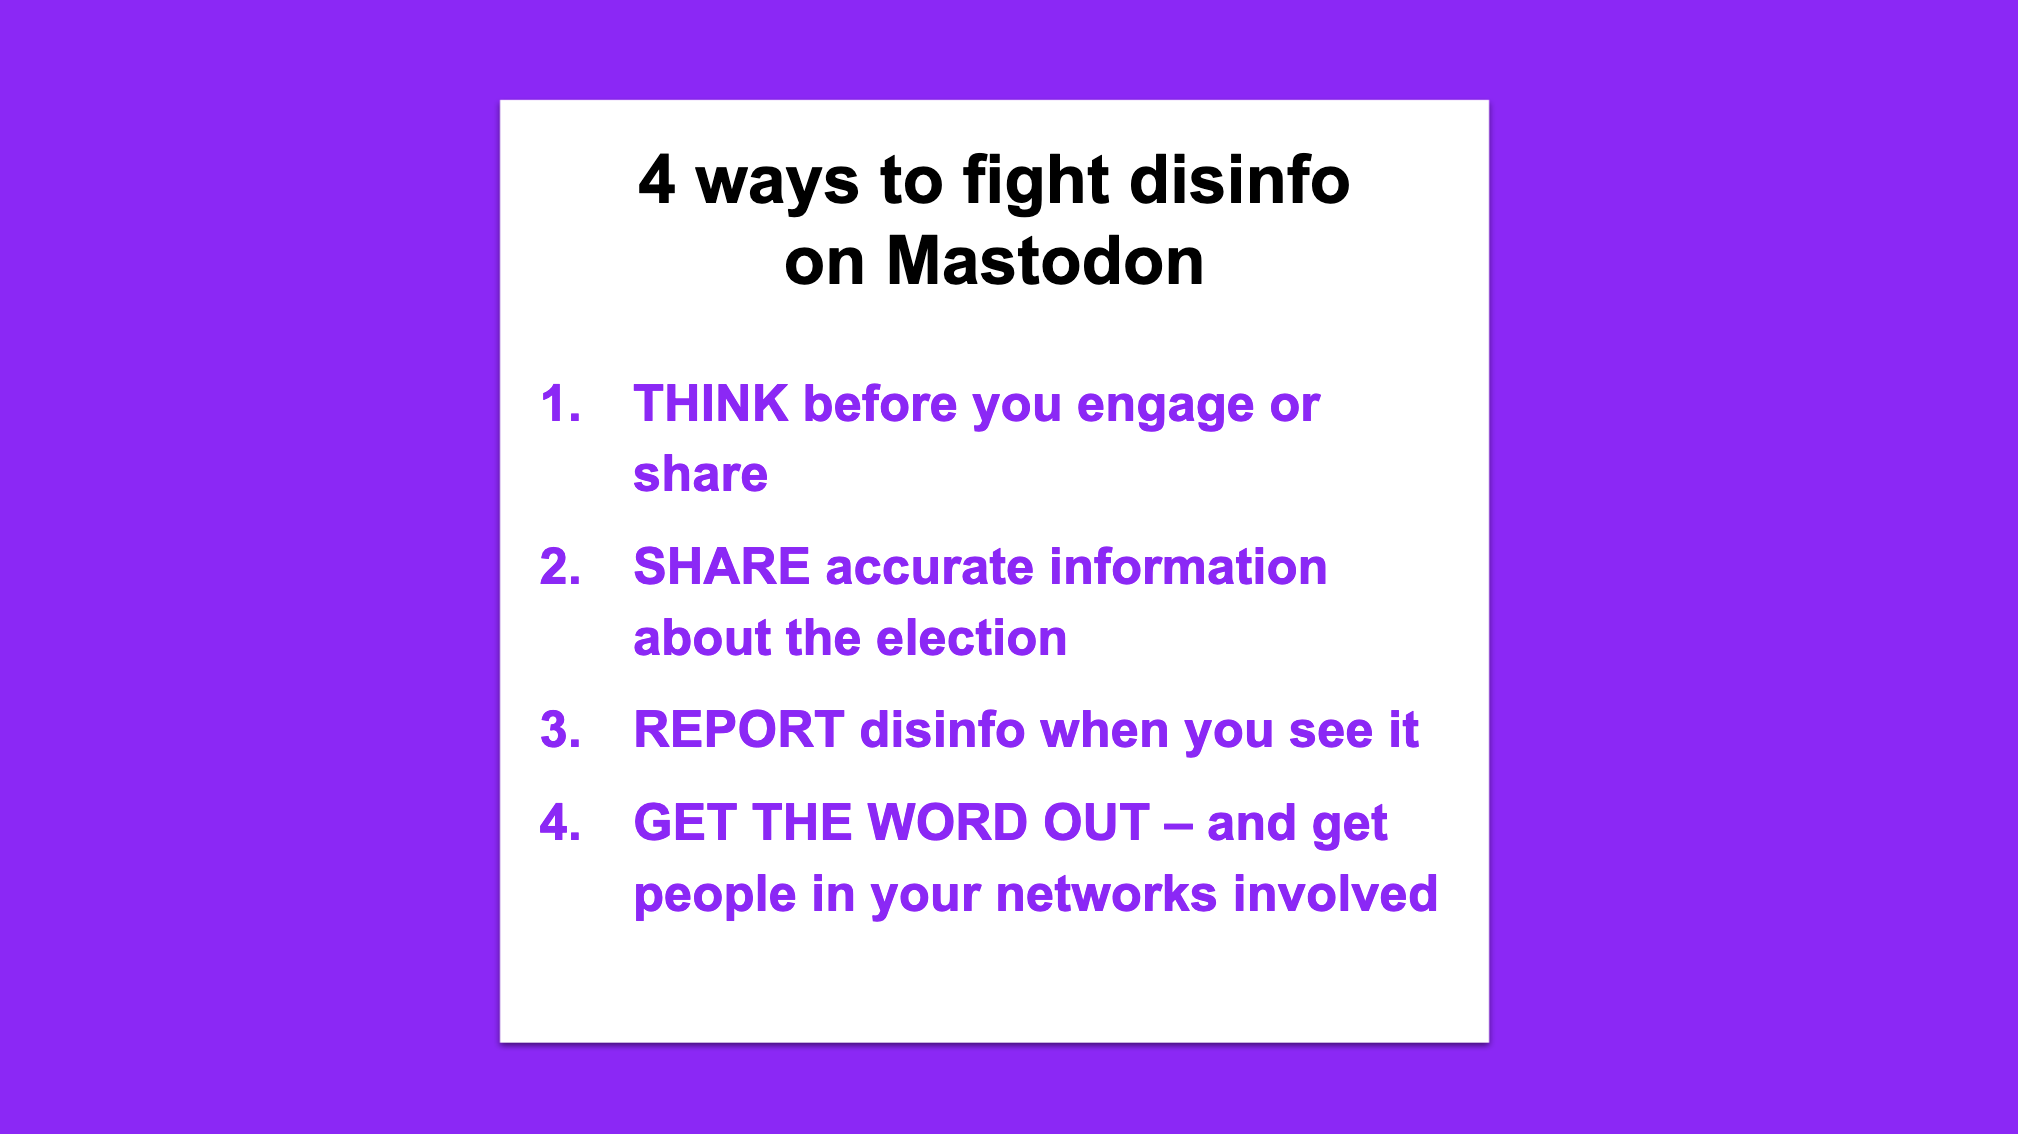 4 ways to fight disinfo on Mastodon, starting with THINK before you engage or share. The full list is in the artcle.